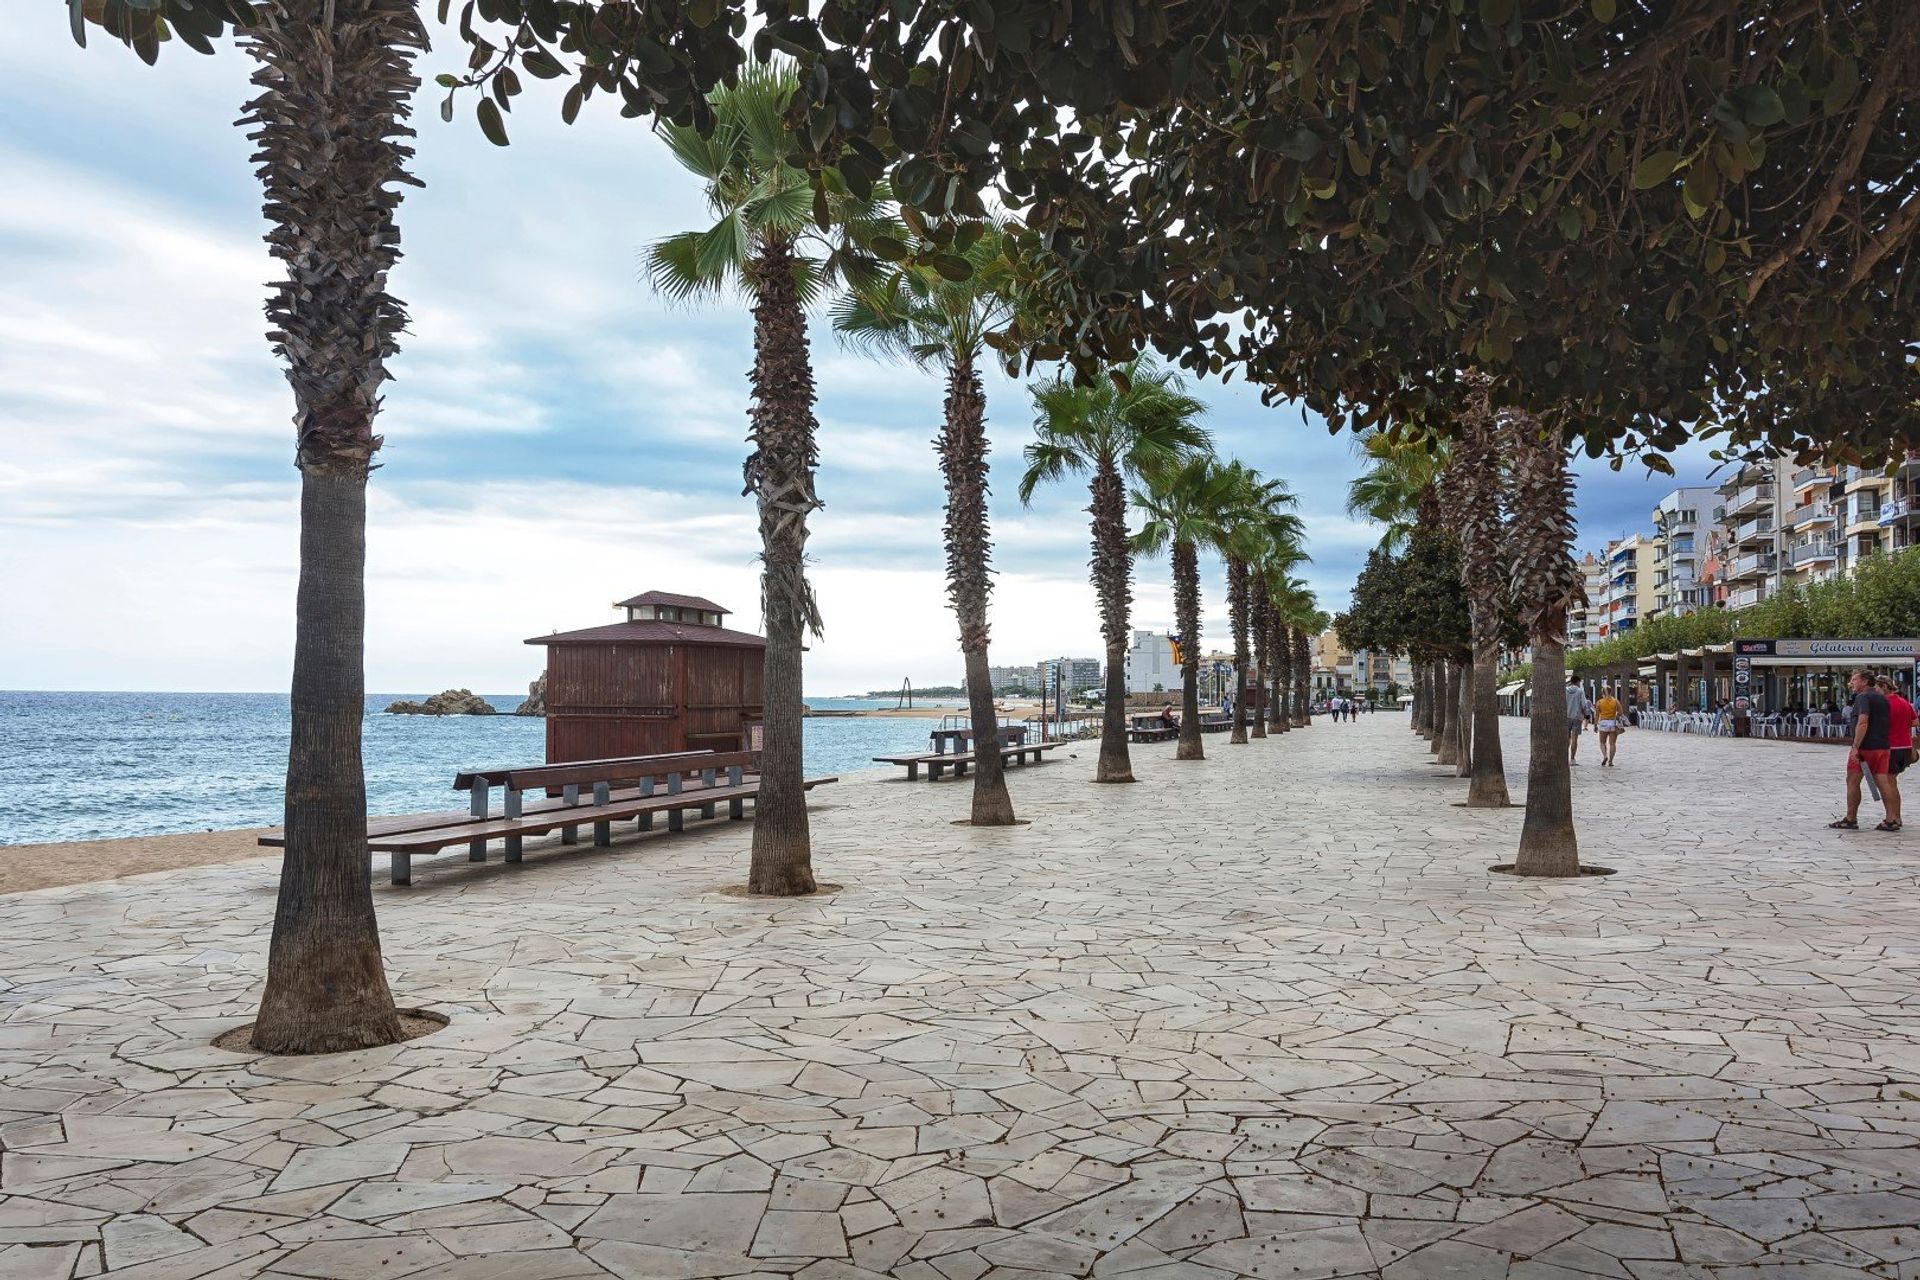 Palm Alley promenade has cycle lanes, market stalls and plenty of amenities for children